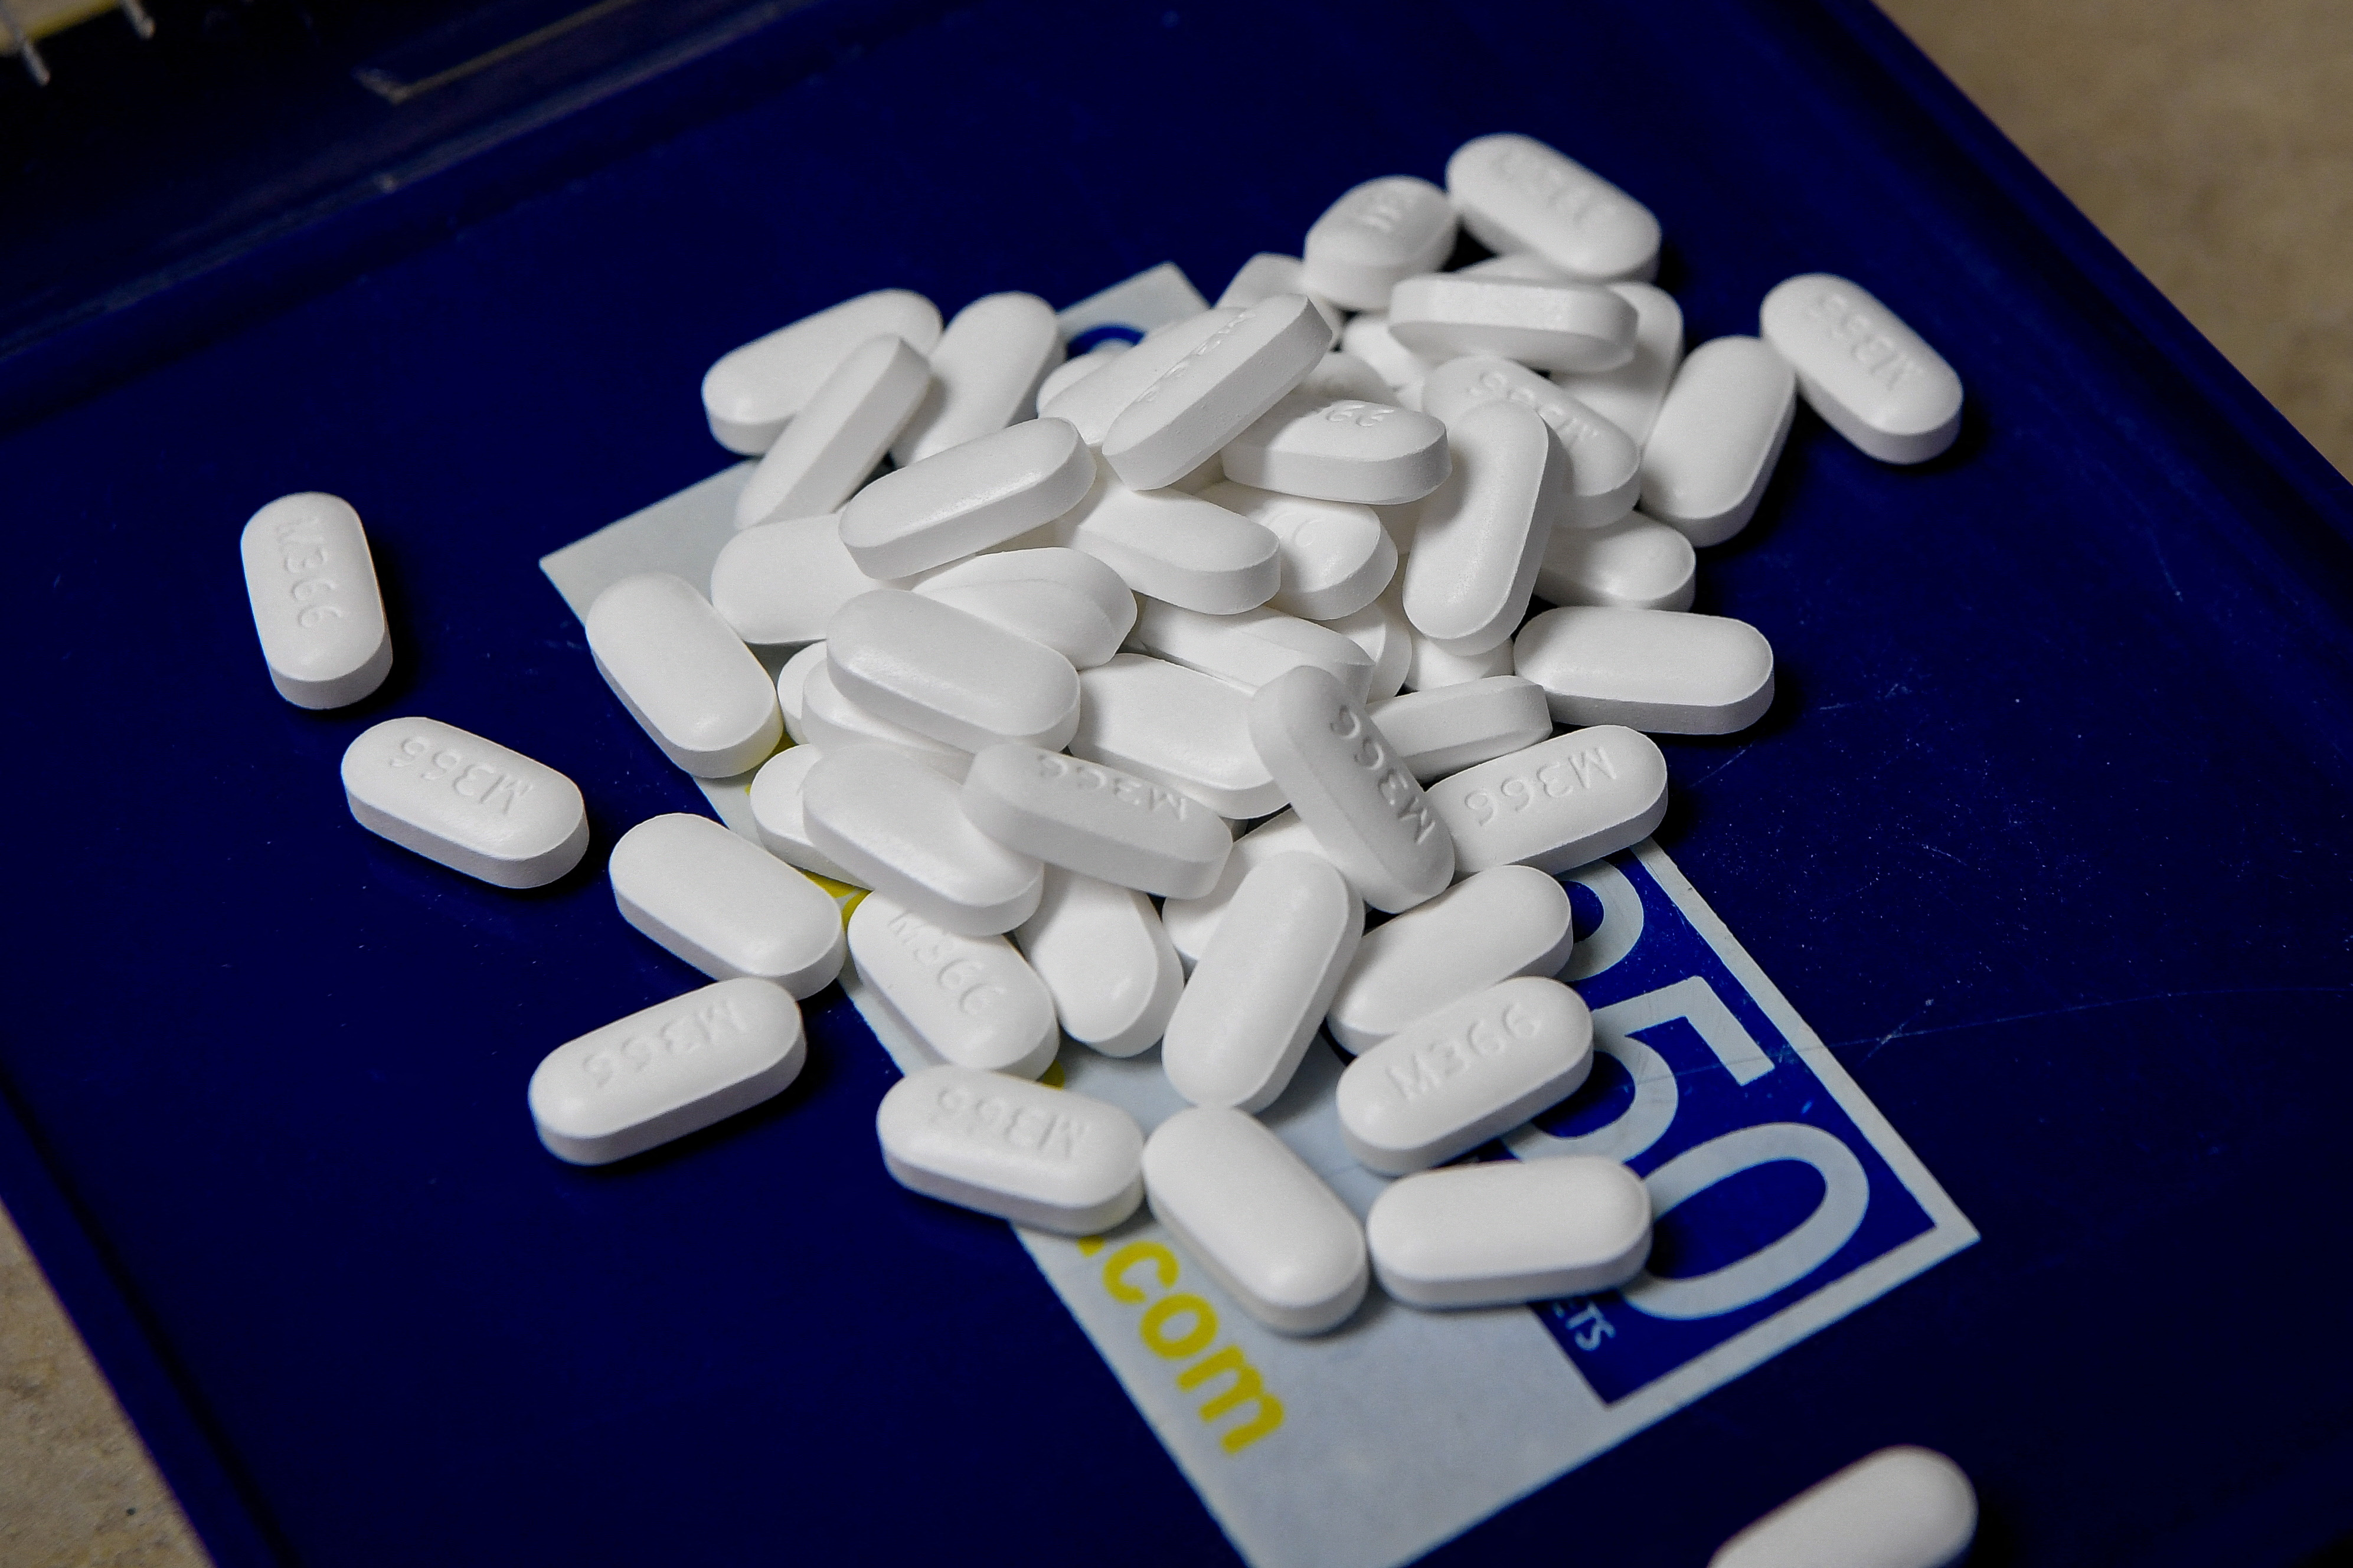 Opioid-based hydrocodone tablets in a Portsmouth pharmacy